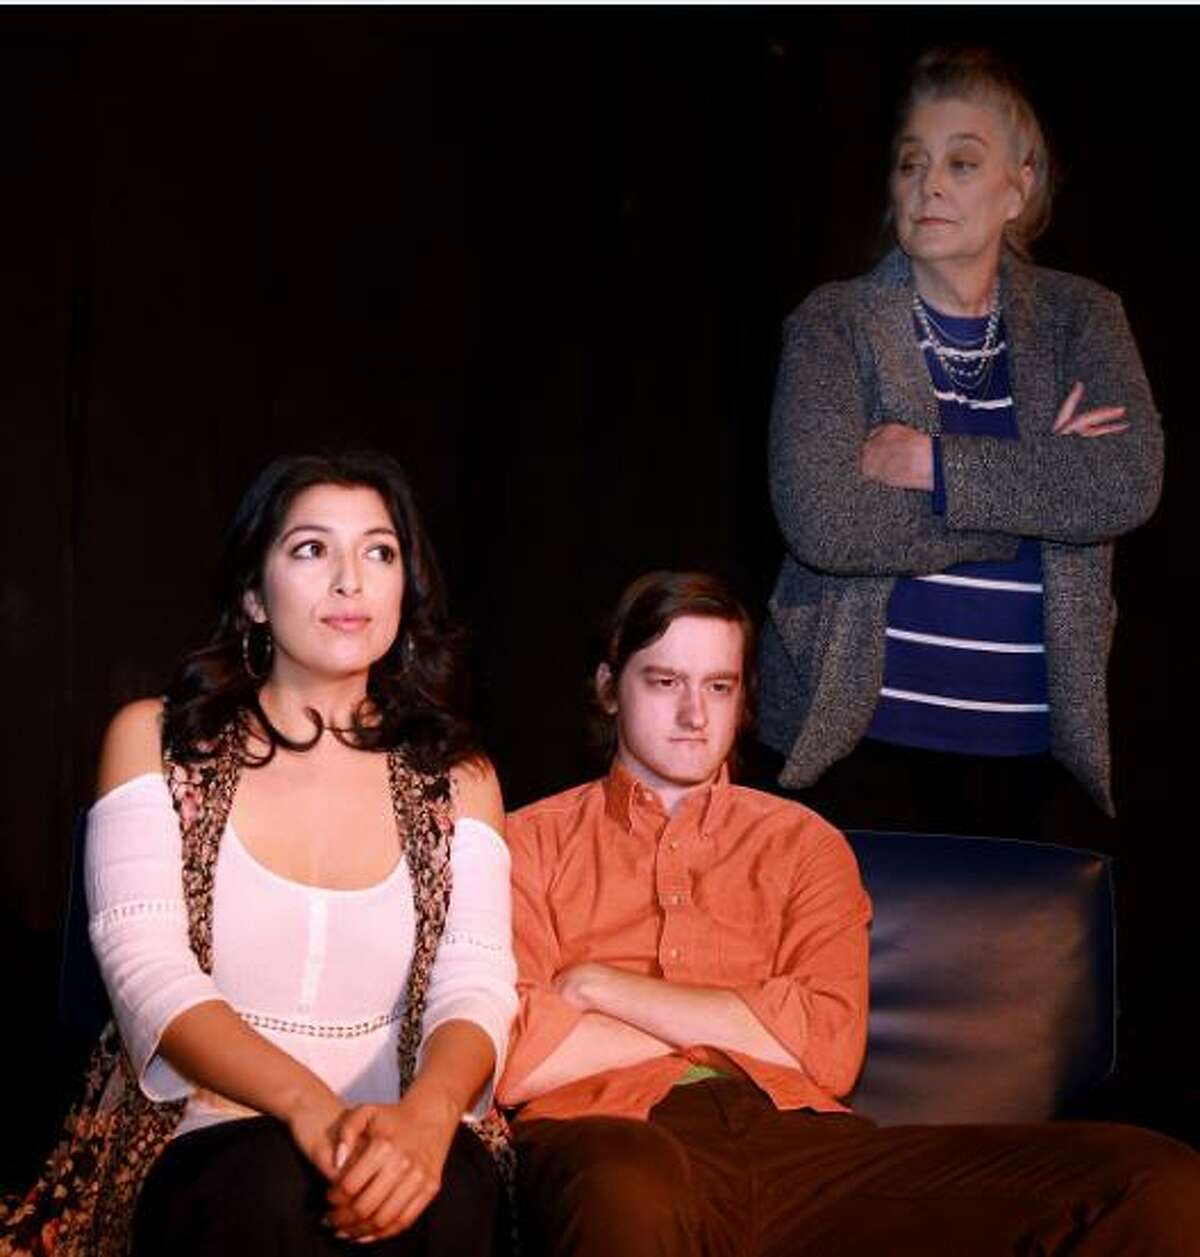 Mrs. Baker disapproves of her son’s new friend.The cast of Theatre Southwest for "Butterflies Are Free" includes, from left, Lauren Becerra-Gongora, Matt Prideaux and Lisa Schofield.